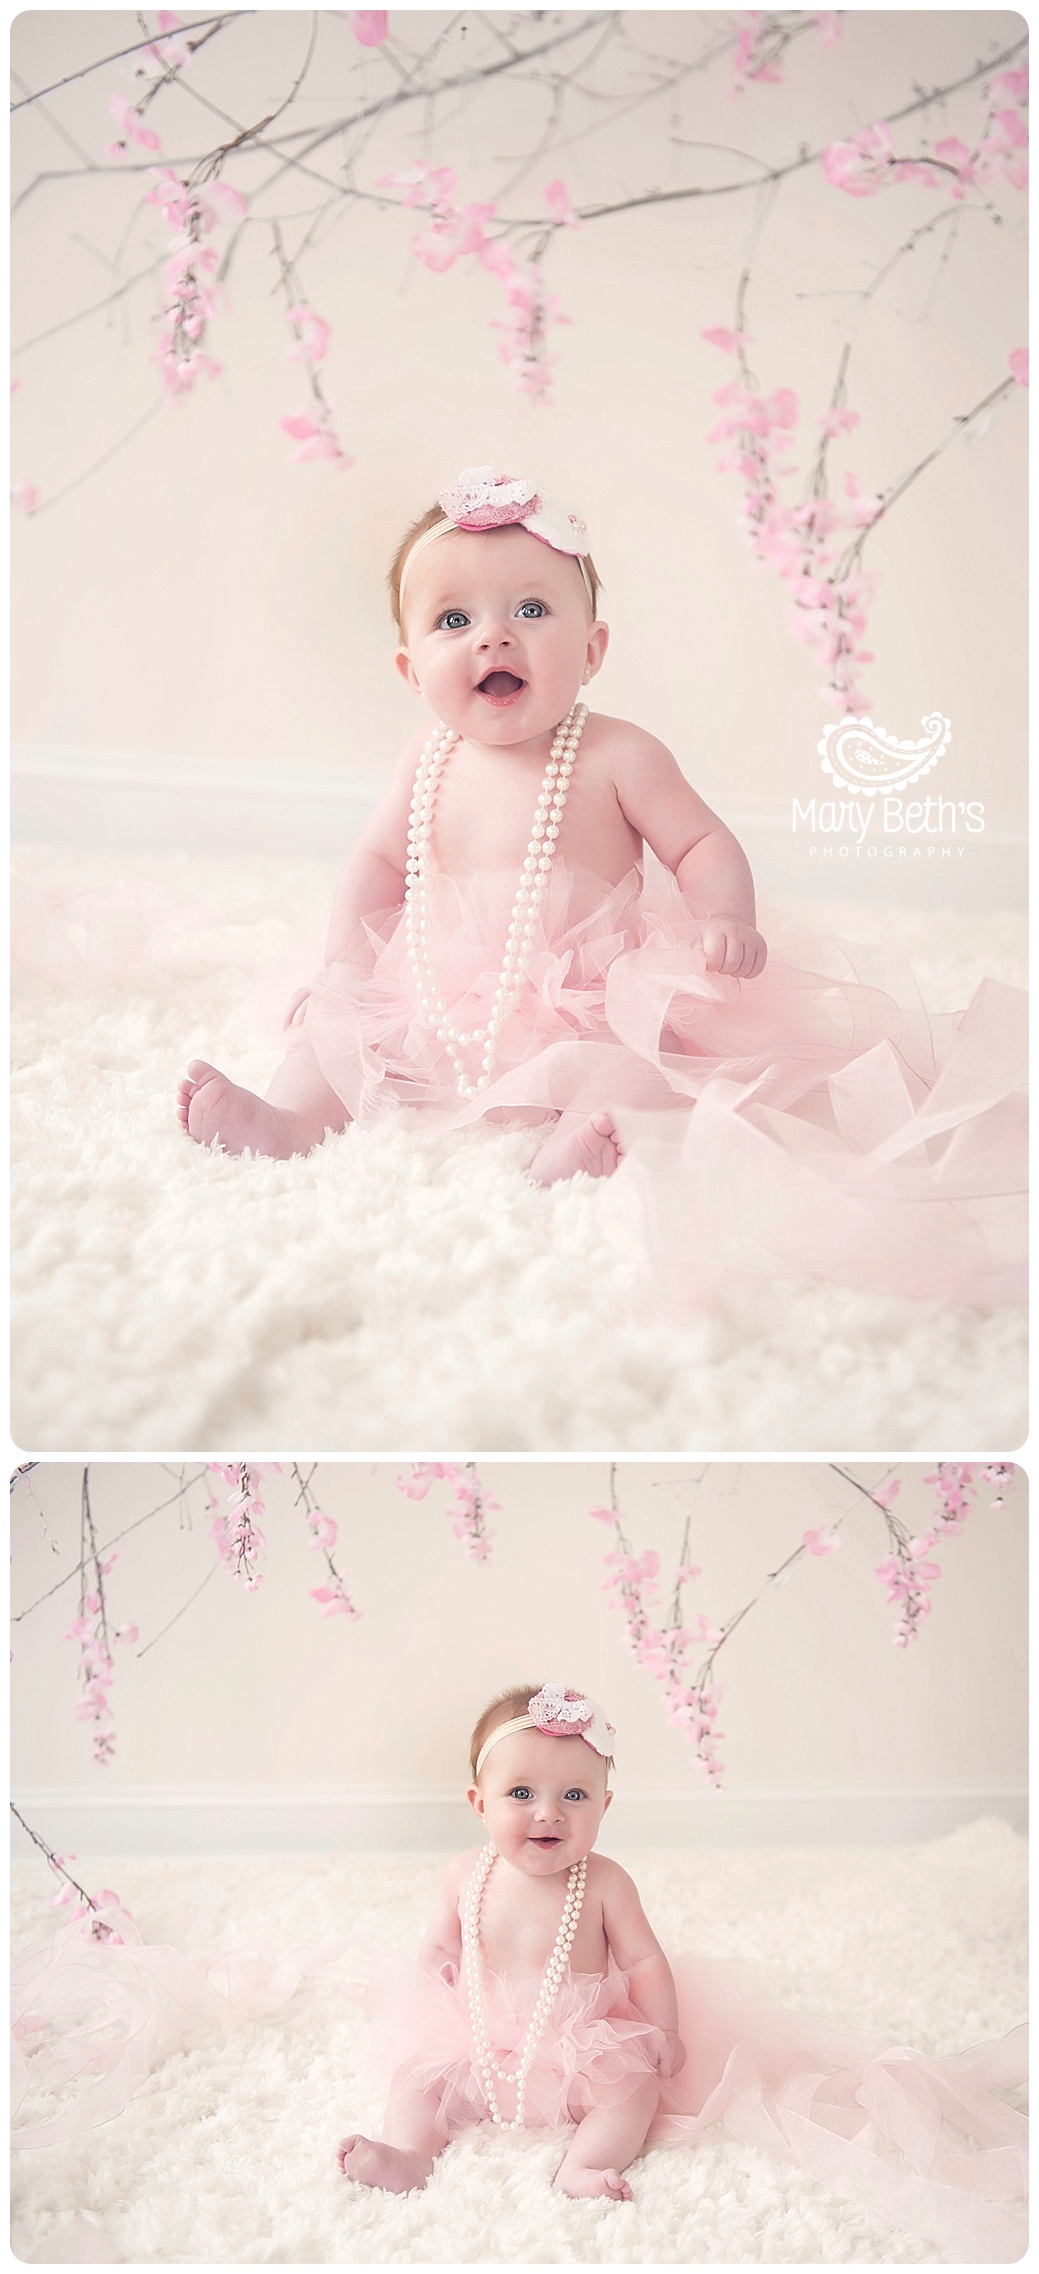 6 month baby girl studio session